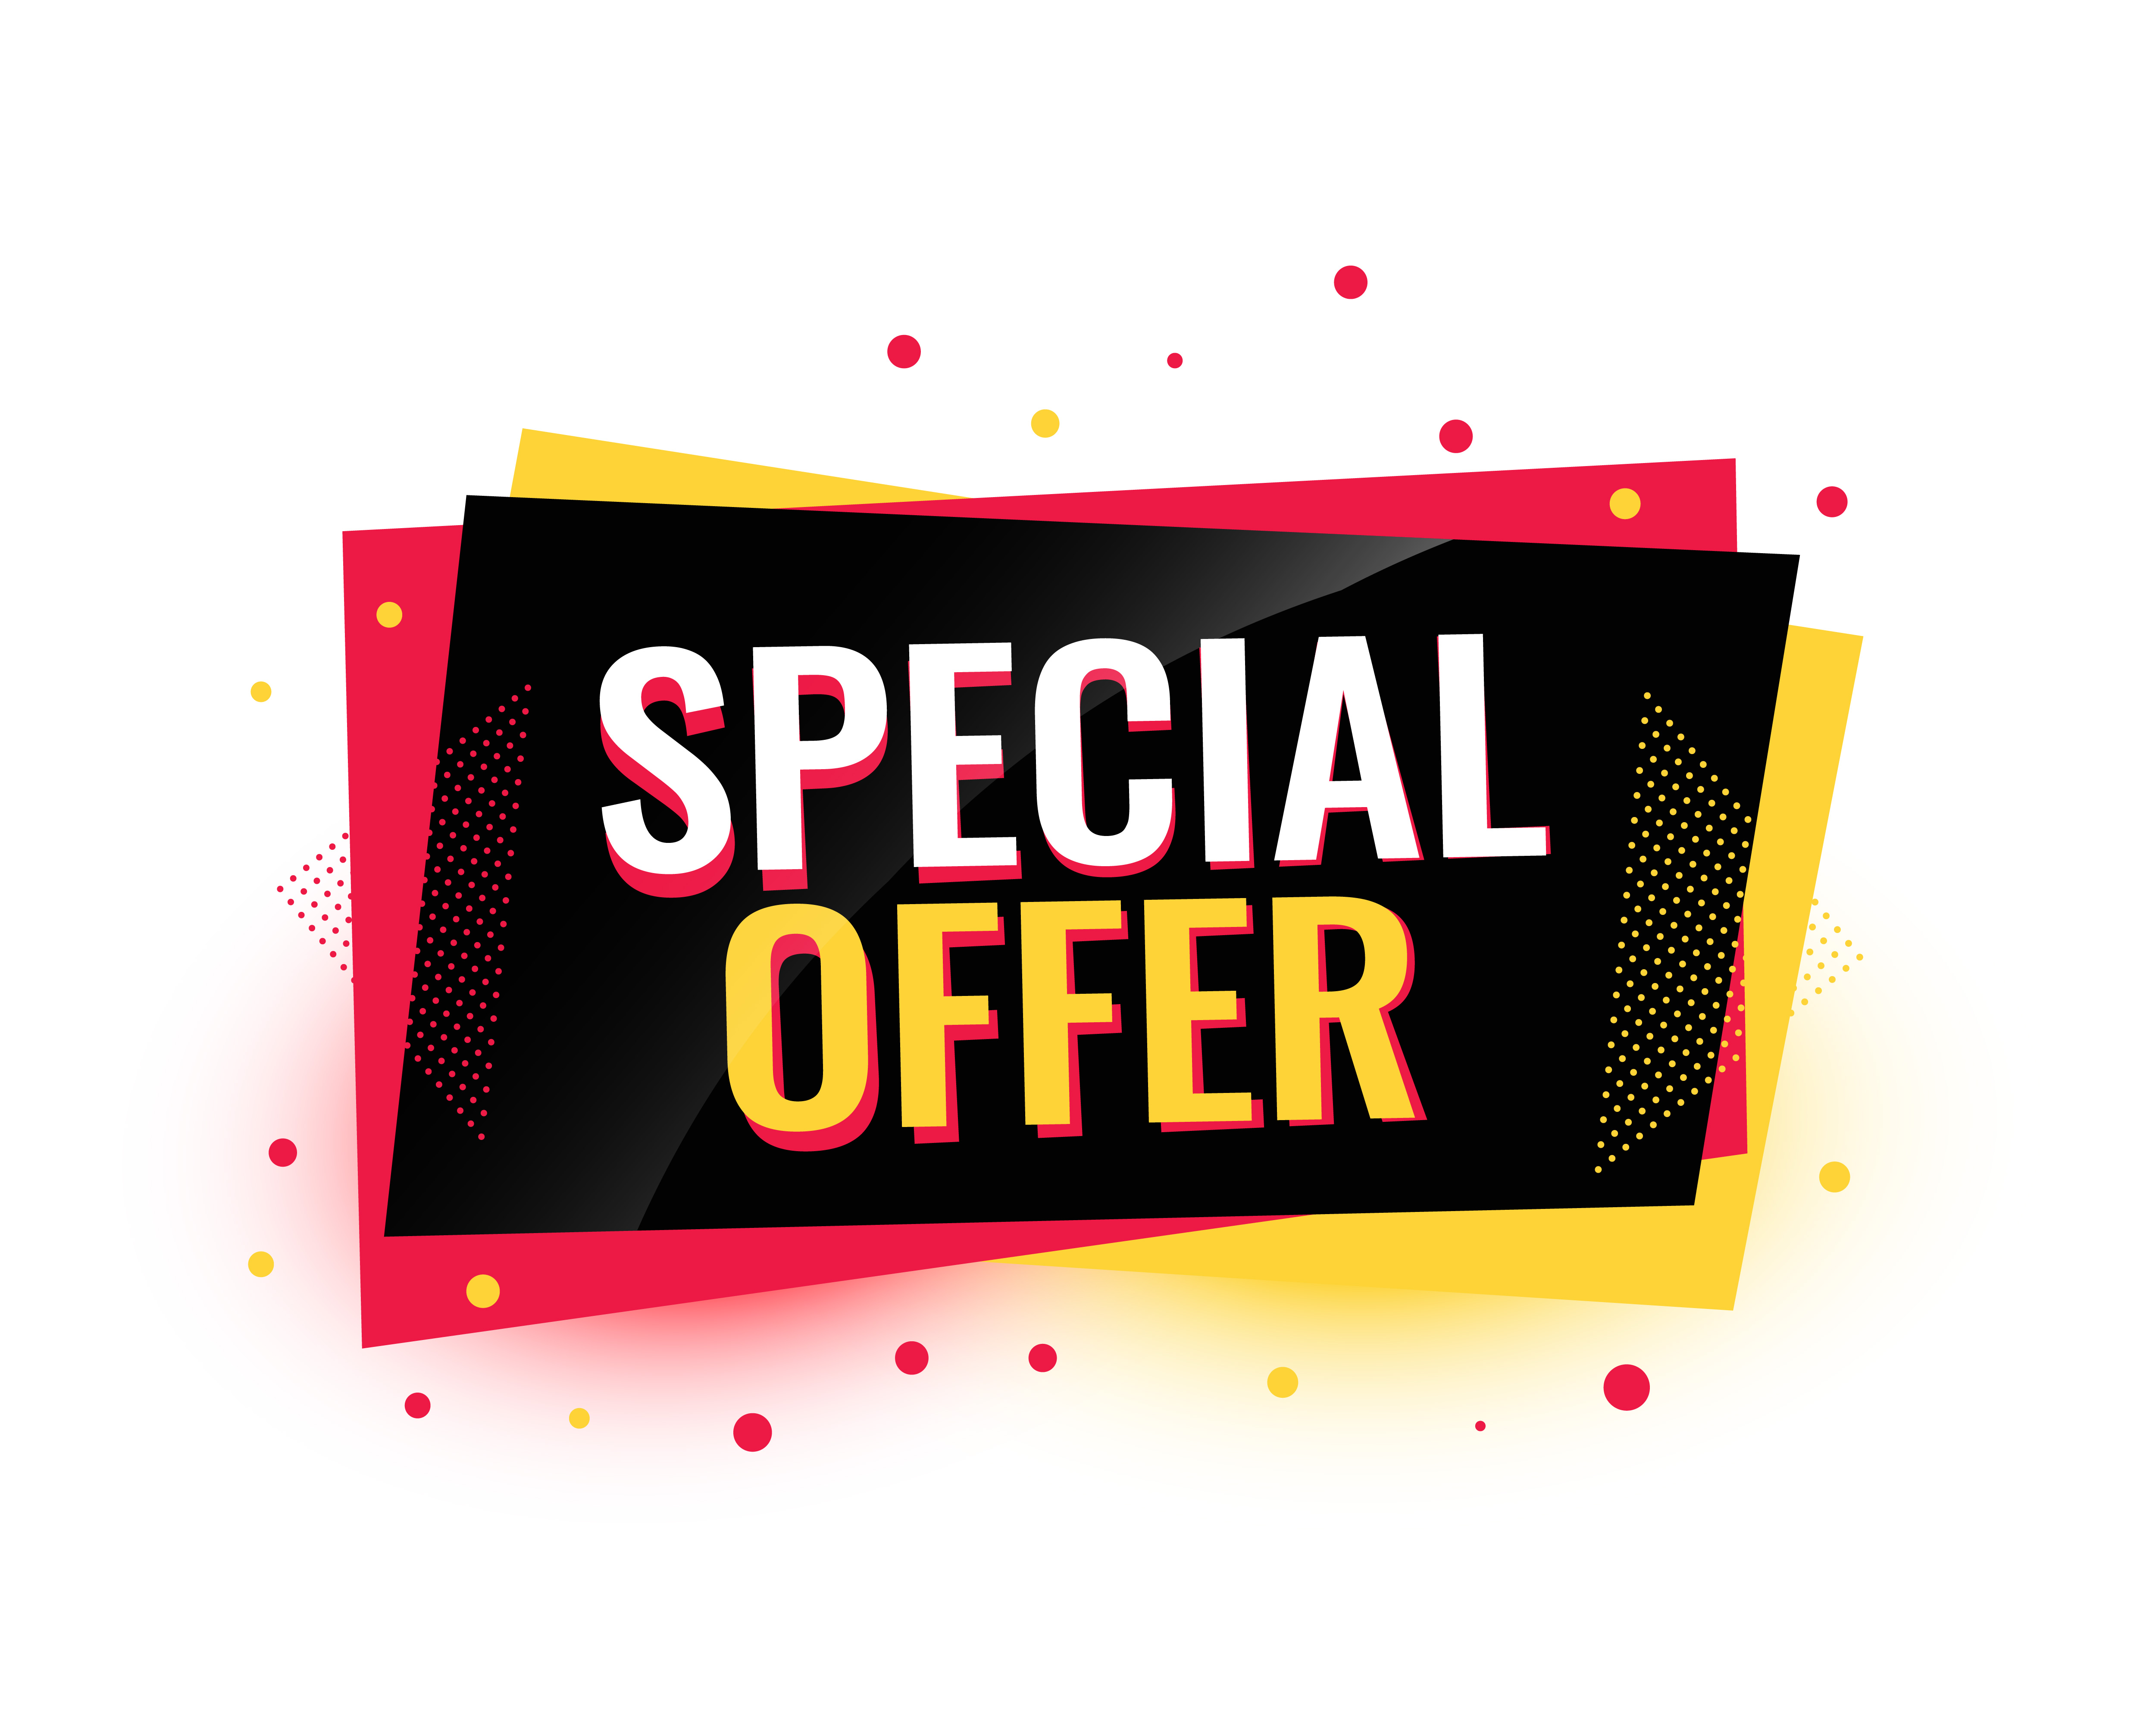 Betting site special offers